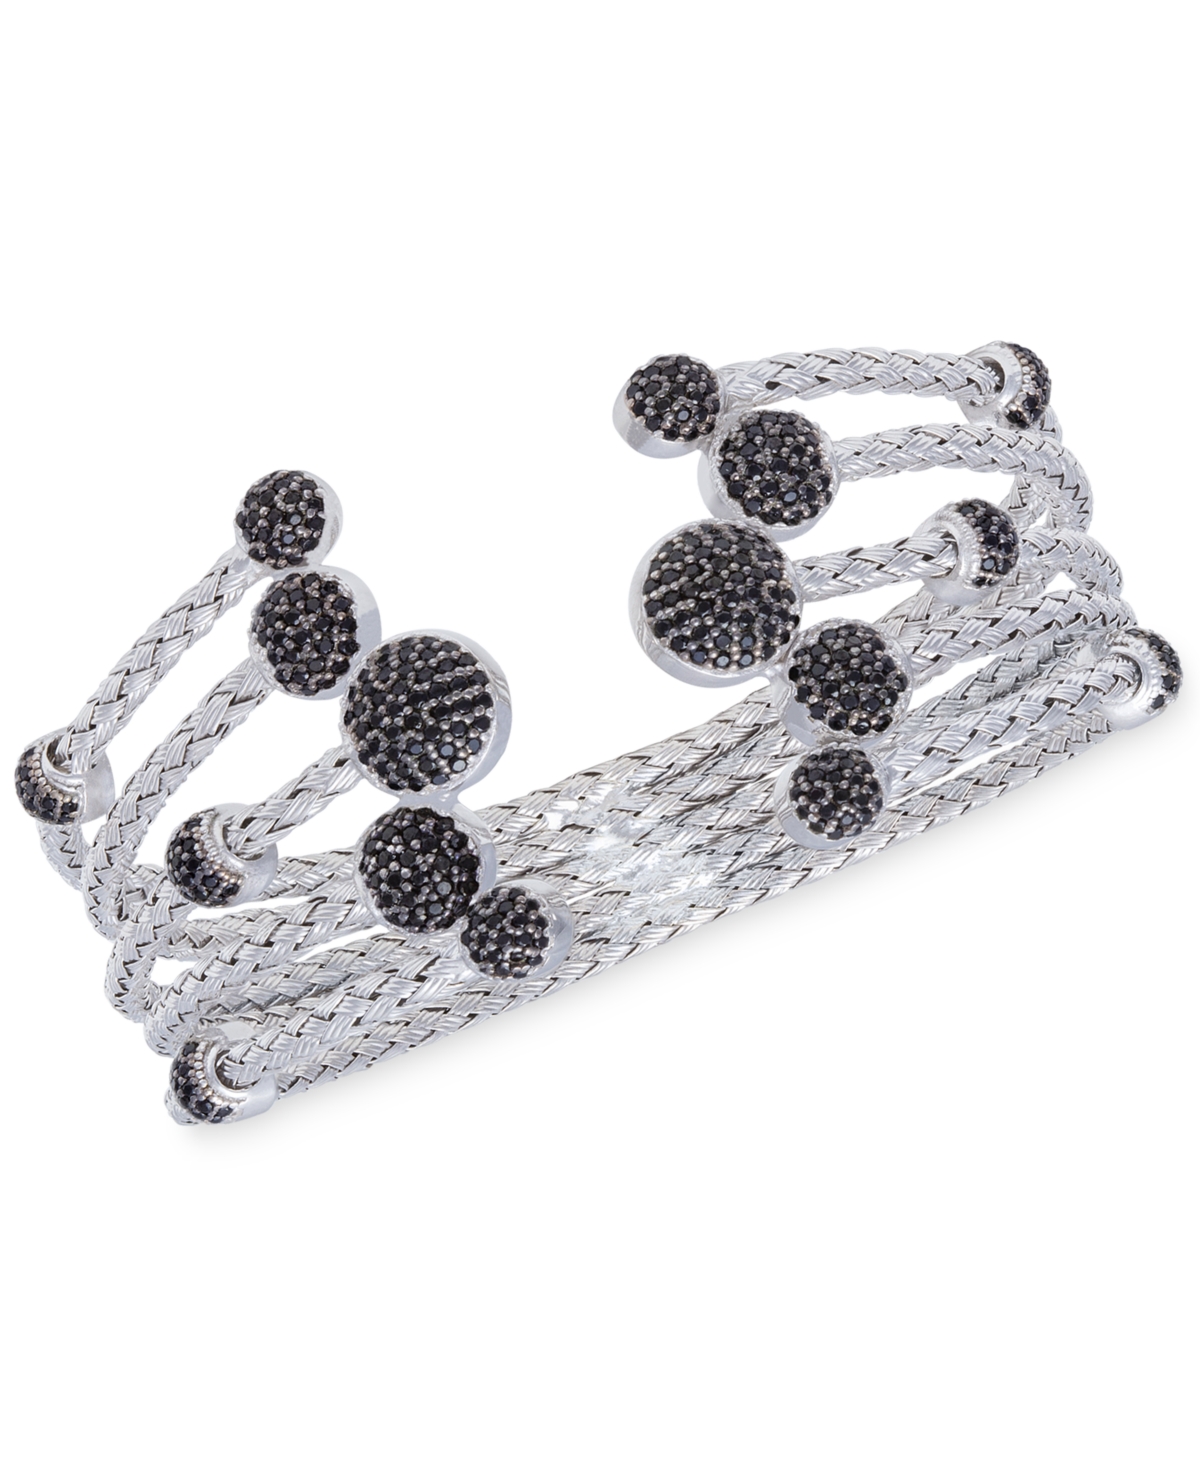 5 Row Crystal Dome Cuff Bangle in Sterling Silver - Black